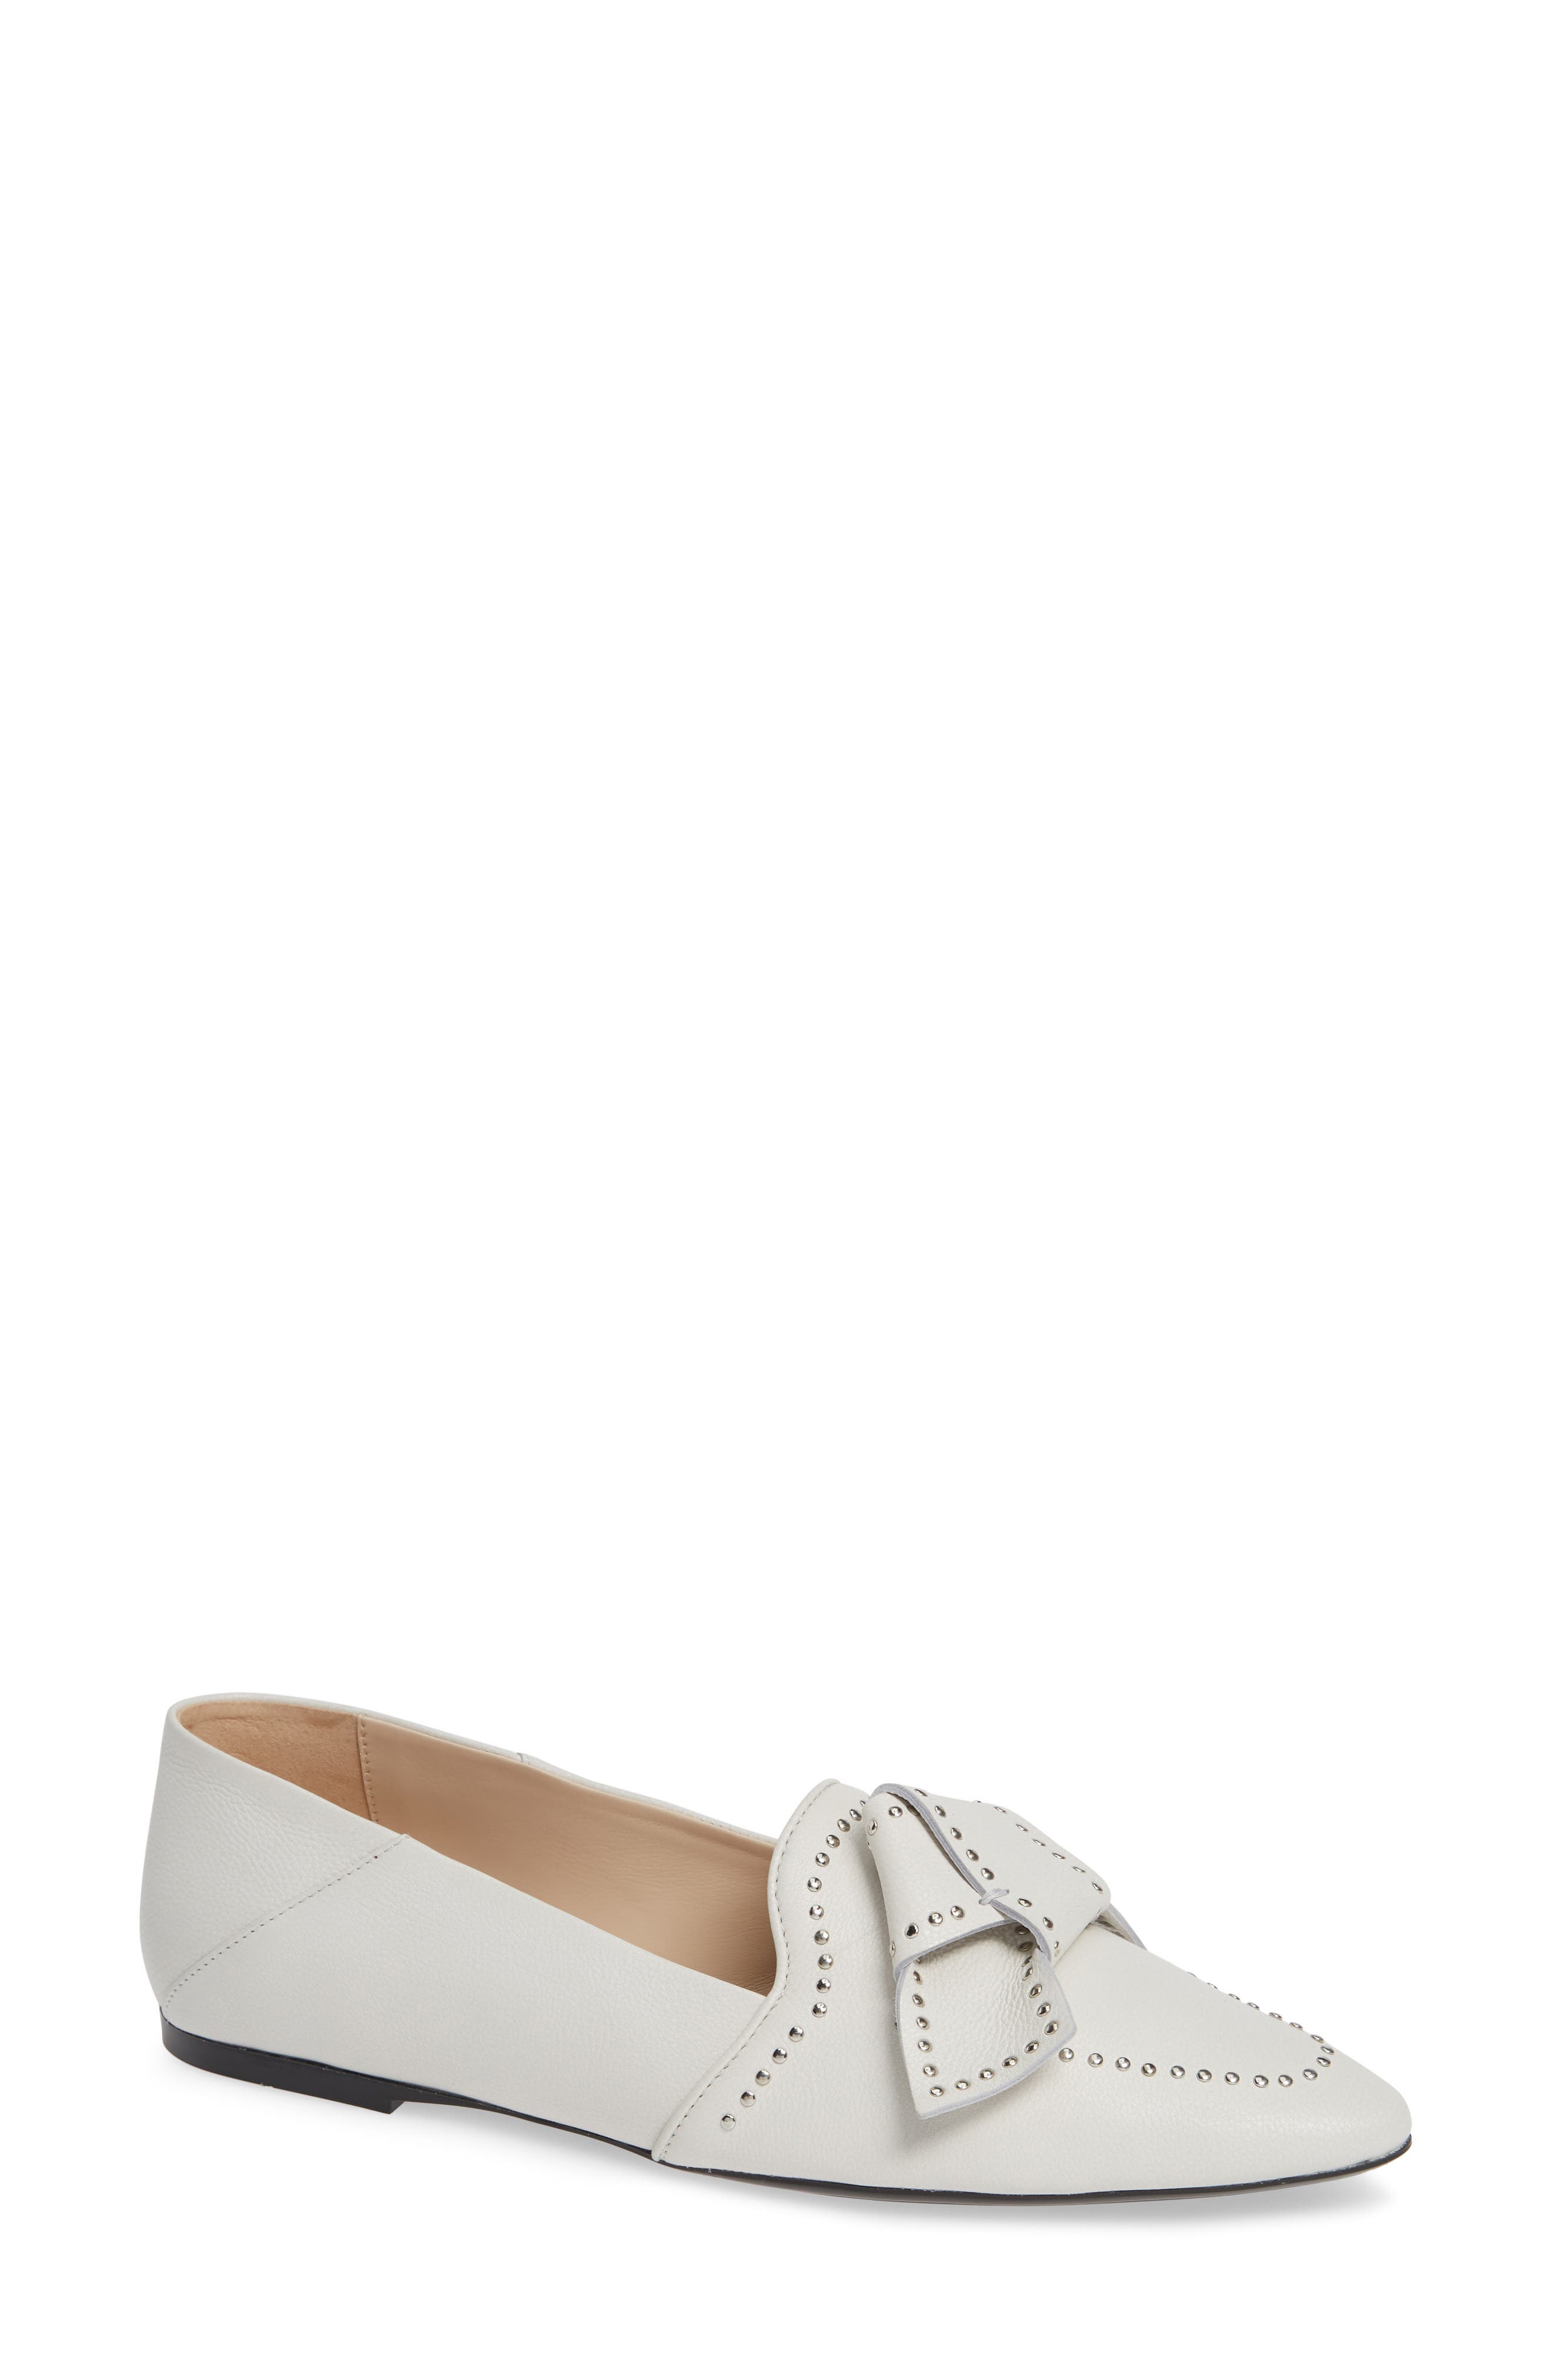 Women's Tod's Shoes | Nordstrom